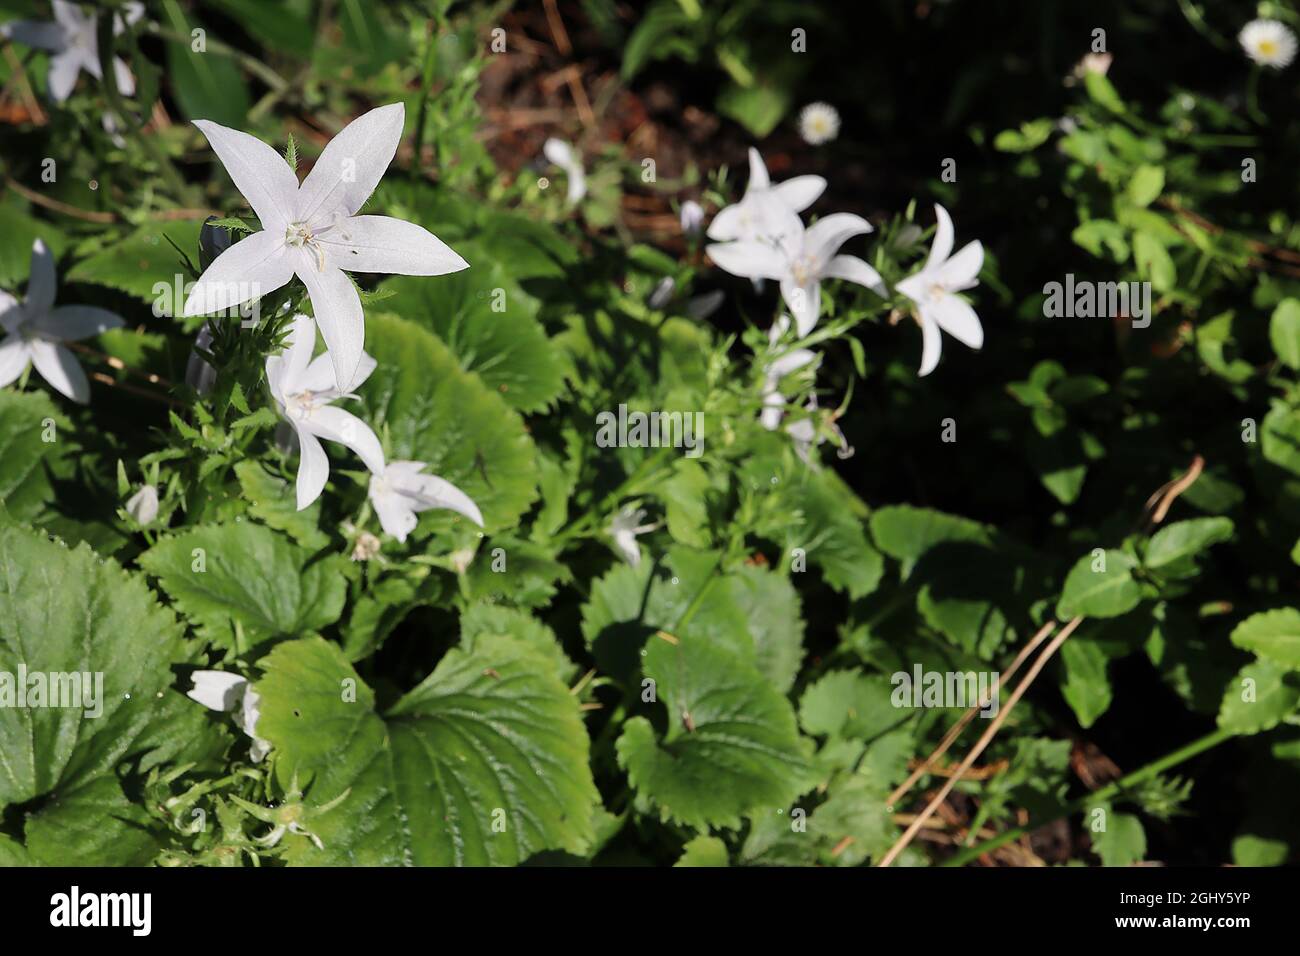 Campanula poscharskyana ‘EH Frost’ trailing bellflower EH Frost – star-shaped white flowers with very pale blue tinge,  August, England, UK Stock Photo